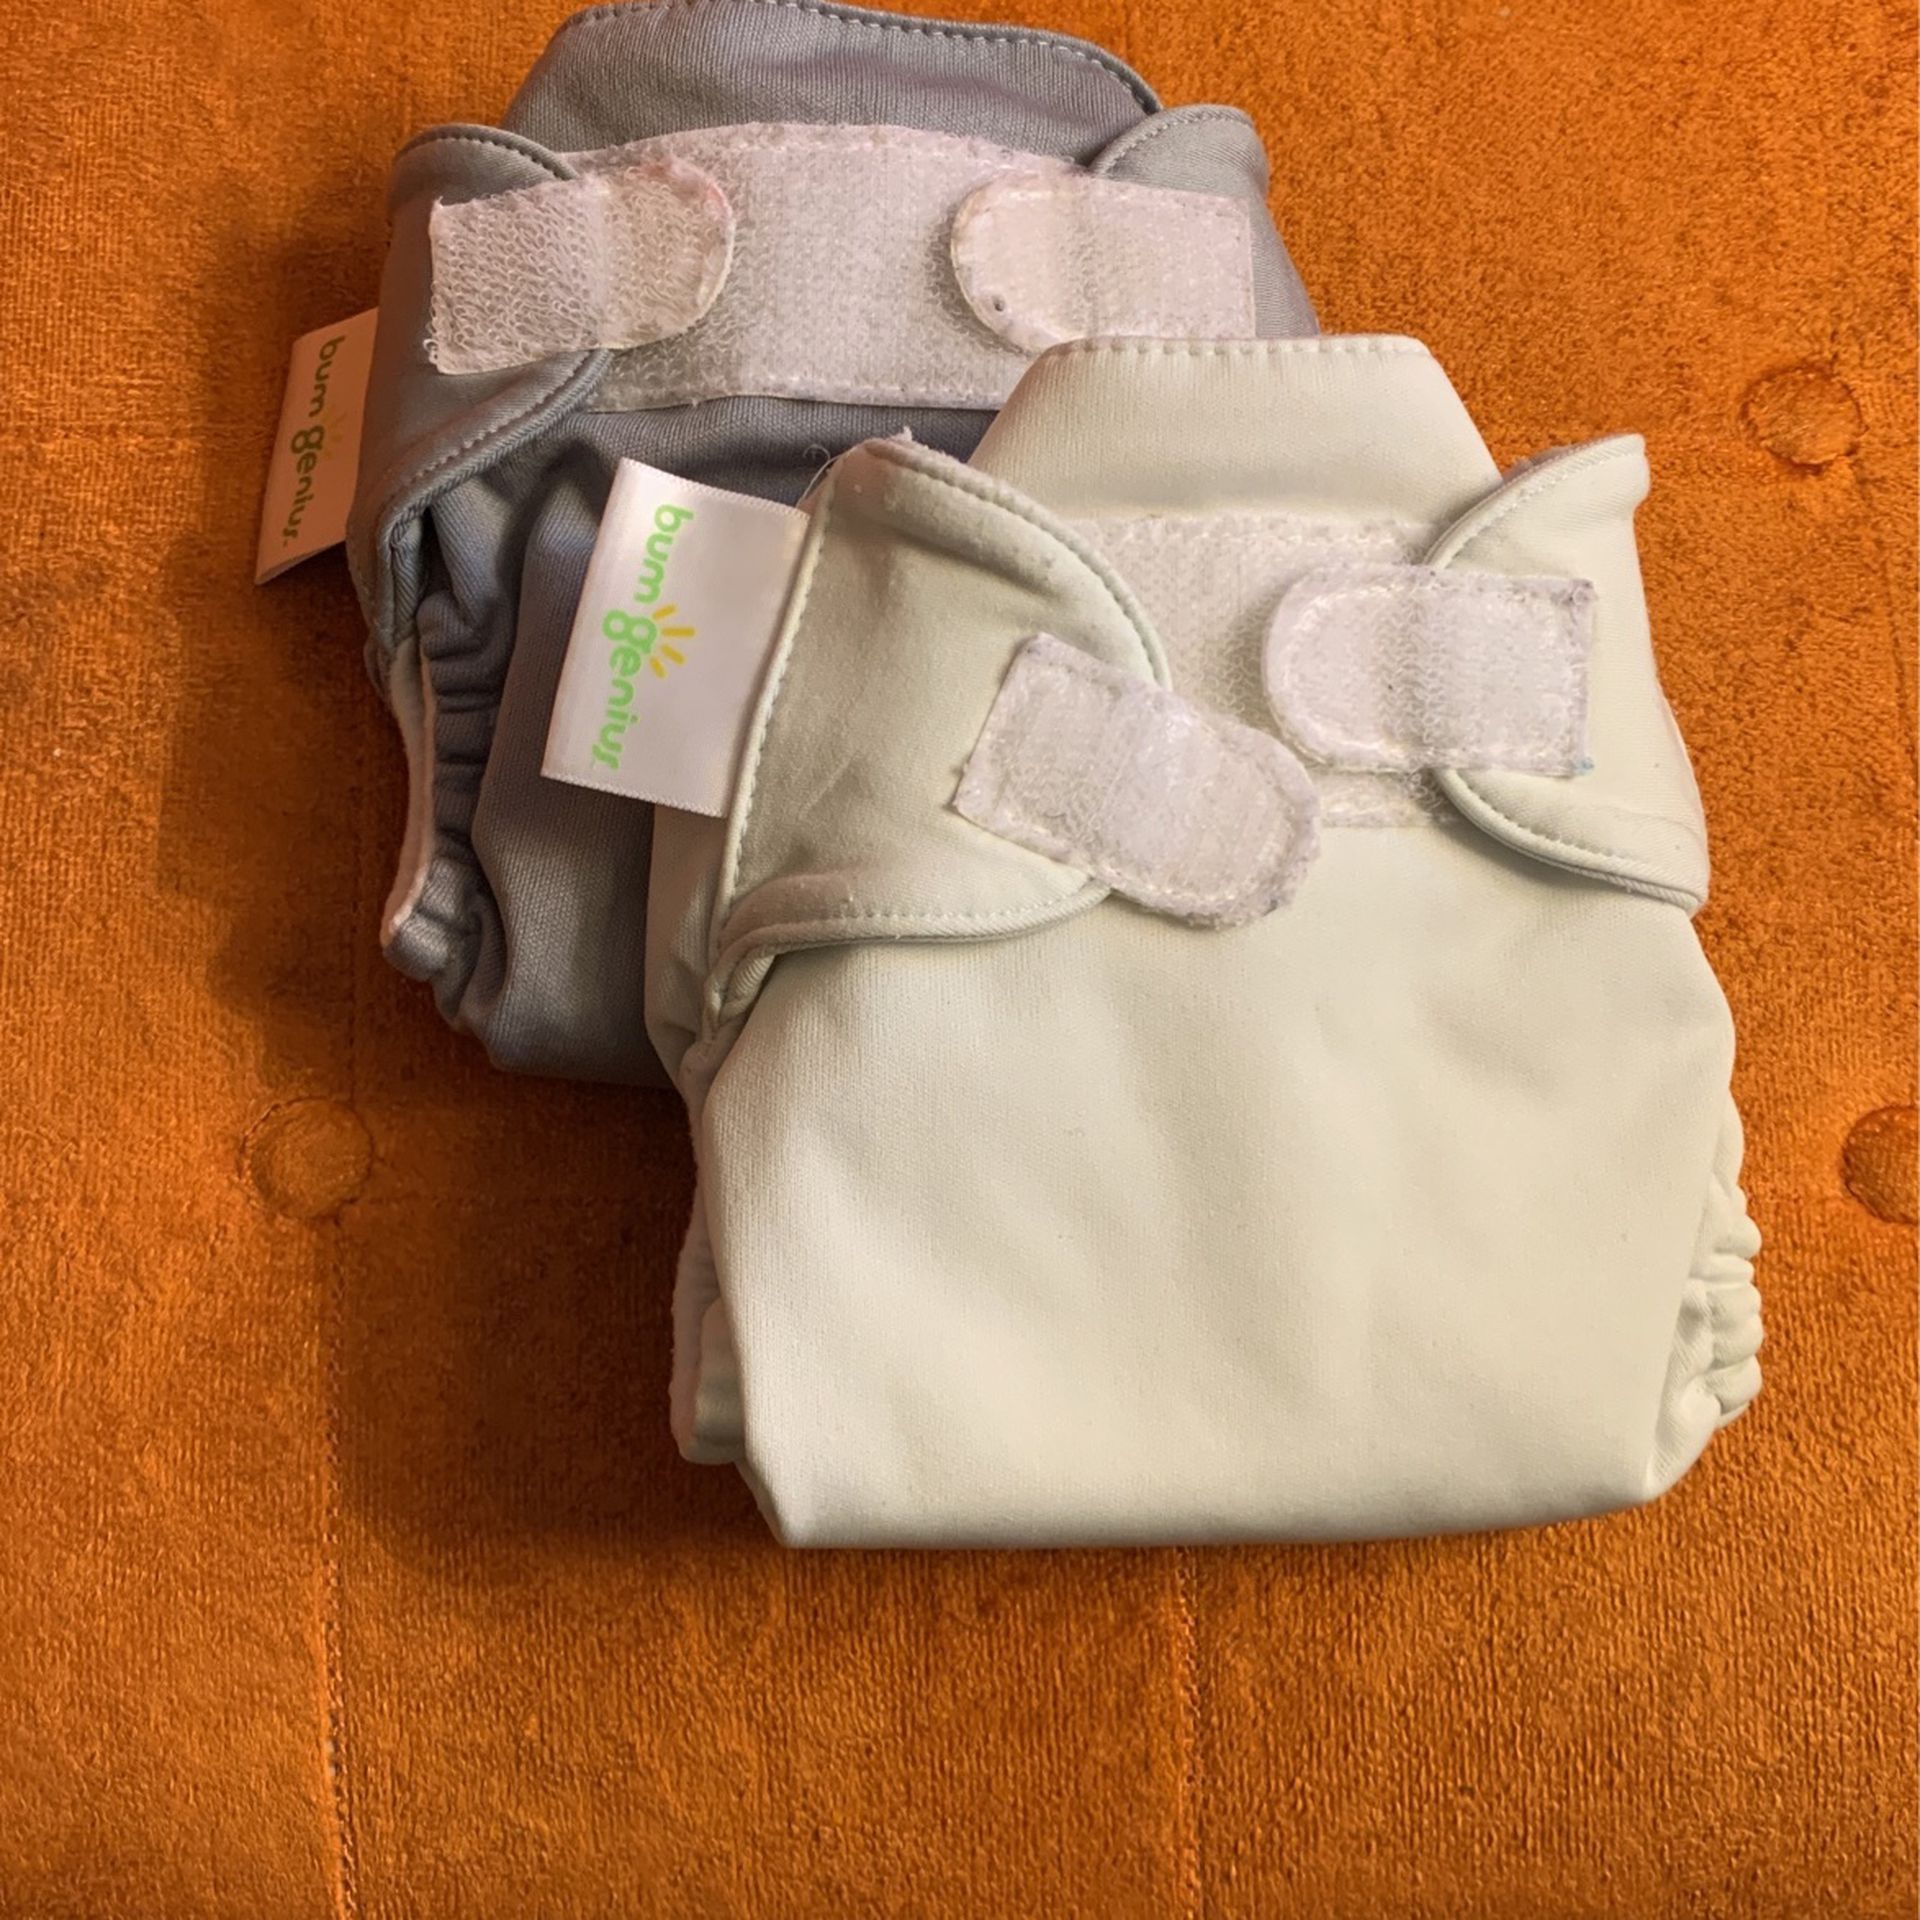 Two Bum genius All In One Cloth Diapers Newborn XS